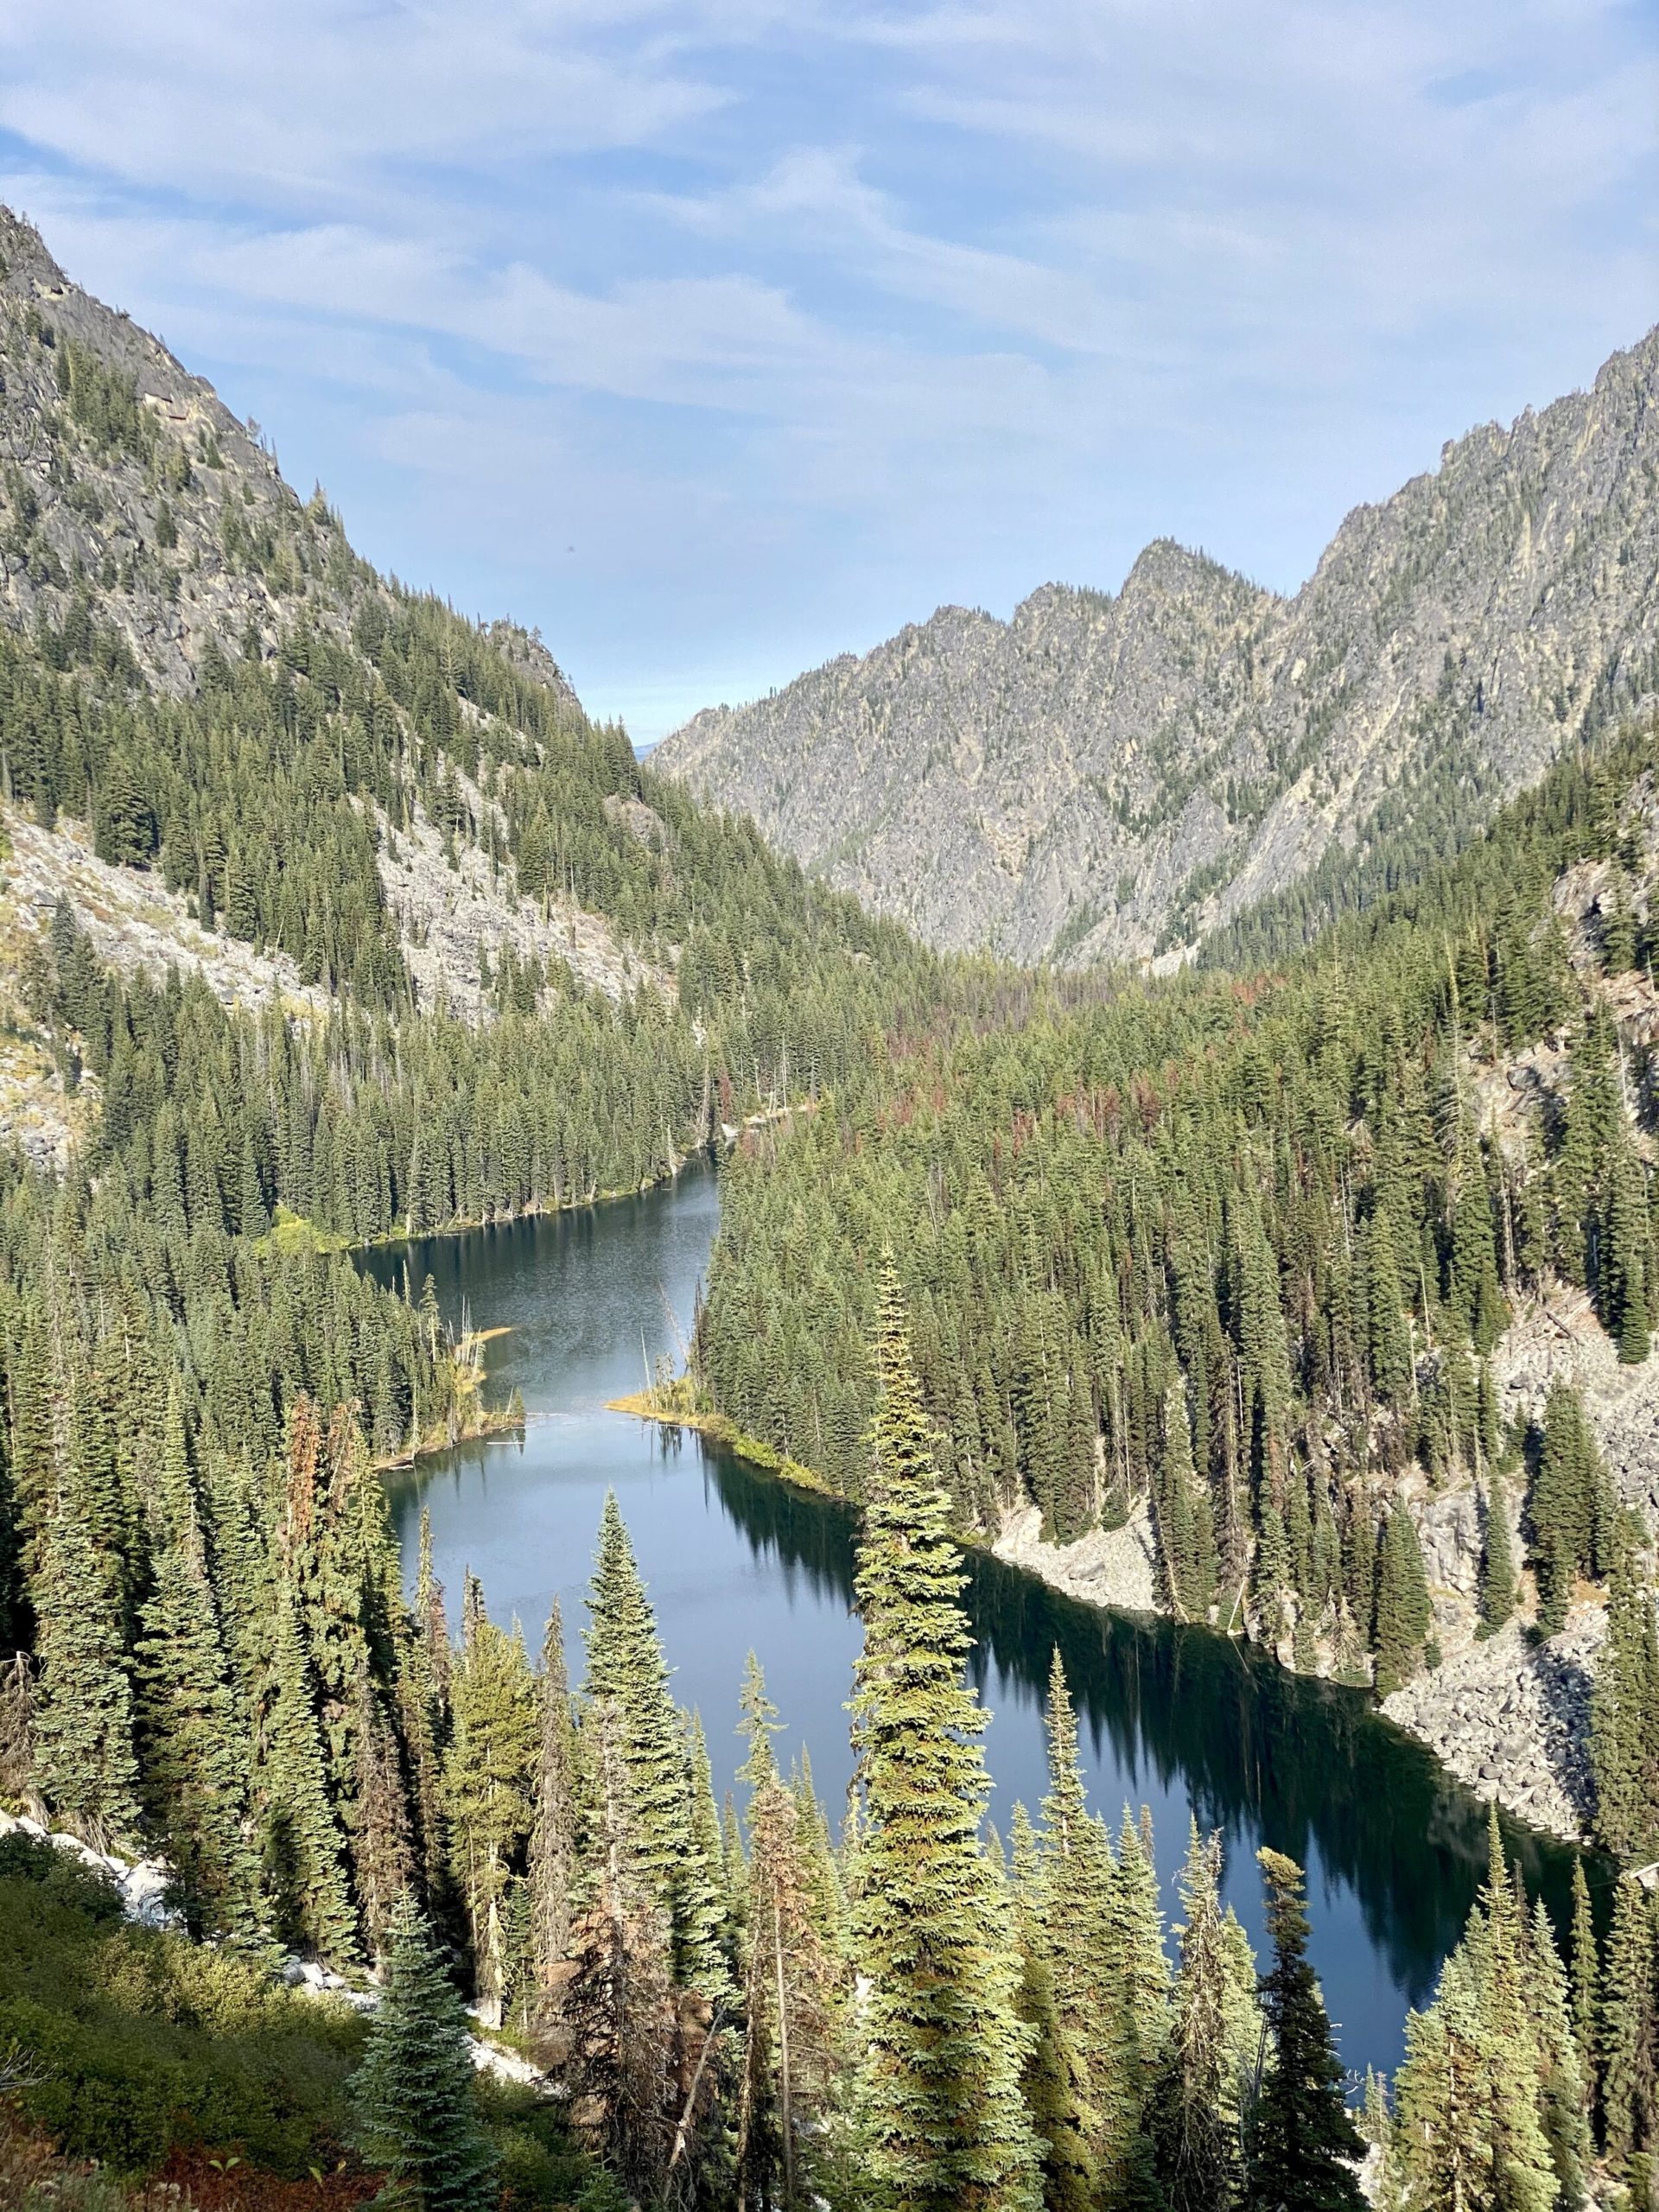 Looking down on Nada Lake after passing Snow Lakes.